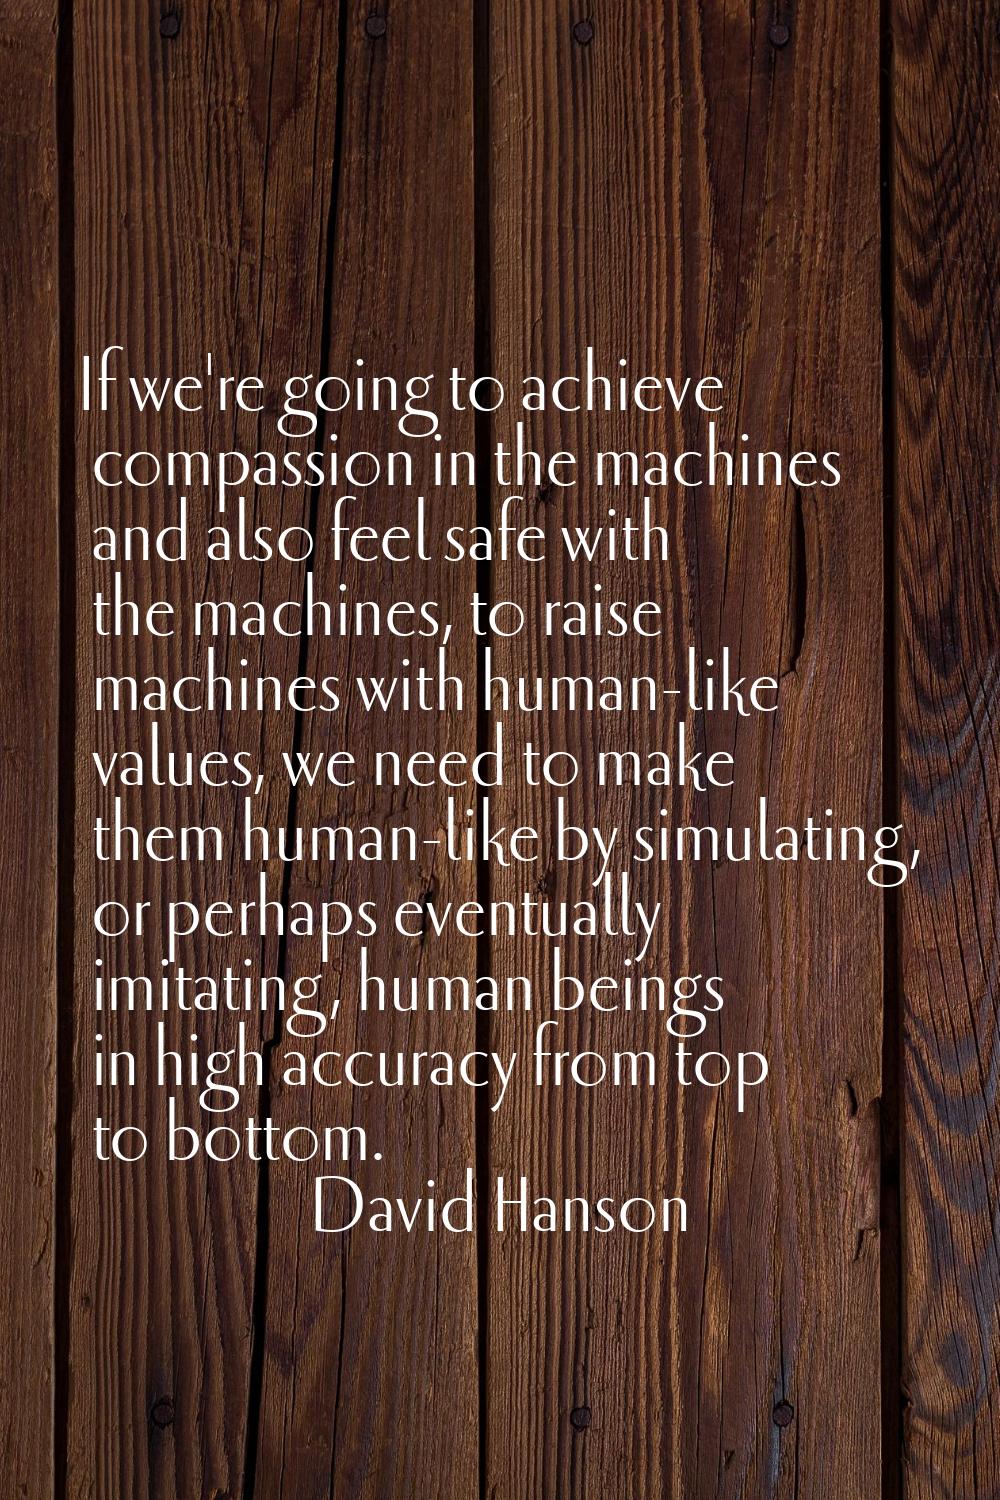 If we're going to achieve compassion in the machines and also feel safe with the machines, to raise